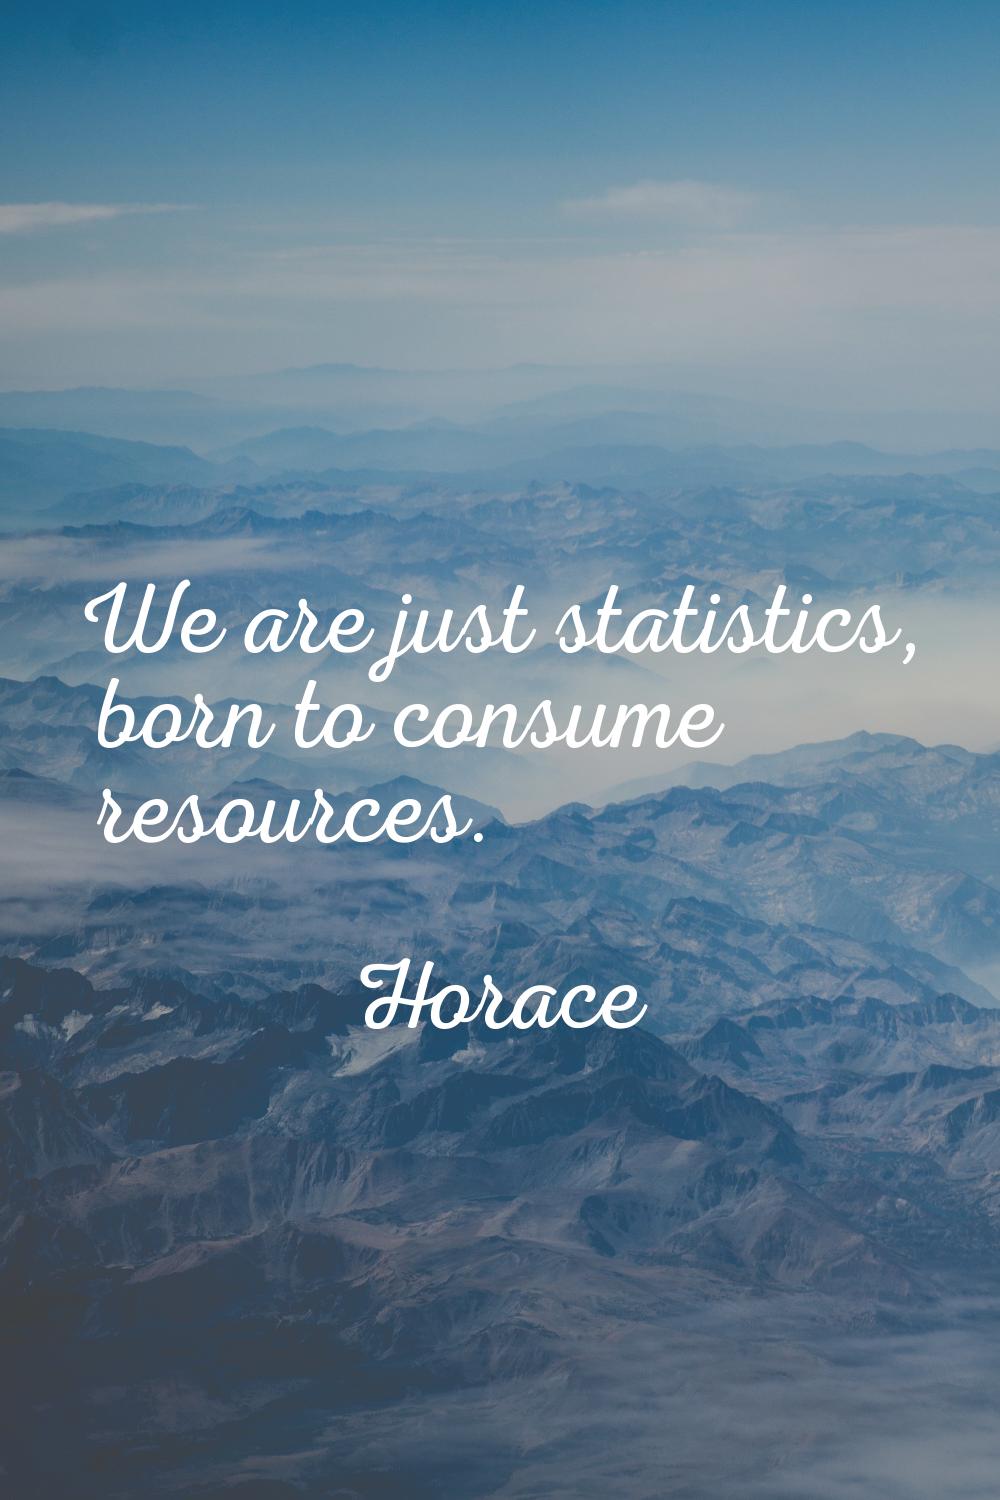 We are just statistics, born to consume resources.